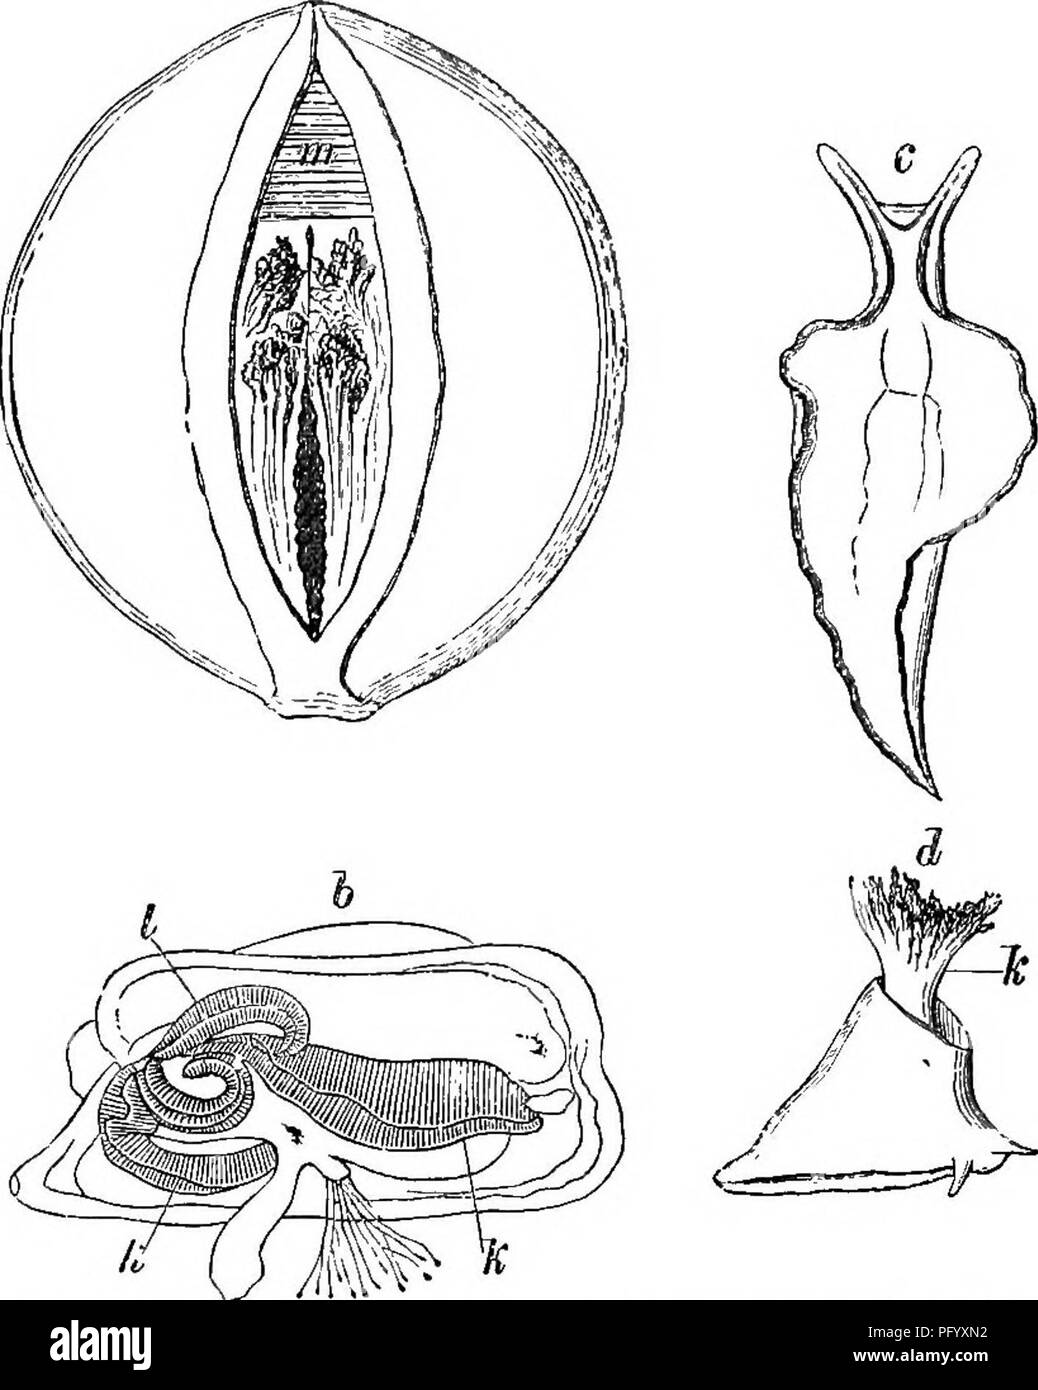 . Animal life as affected by the natural conditions of existence. Animal ecology. 170 THE INFLUENCE 01' INANIMATE SUEROUNDINGS. some species of Lucina (fig. 48, a), situated on the ventral margin of the mantle. In the Annelida the gills are usually an appendage of the legs, and sometimes are placed directly on the body or at the fore end, as in Sahella, Strpula, Terehdla, &amp;c. Finally, the number of Invertebrata is by no means small â which dispense entirely with such distinct, conspicuous organs. :==r^ Pig. 43.-Gills of Mollusca. a, Lvcim pldlippensis, with four nmntle gills belnnd the mus Stock Photo